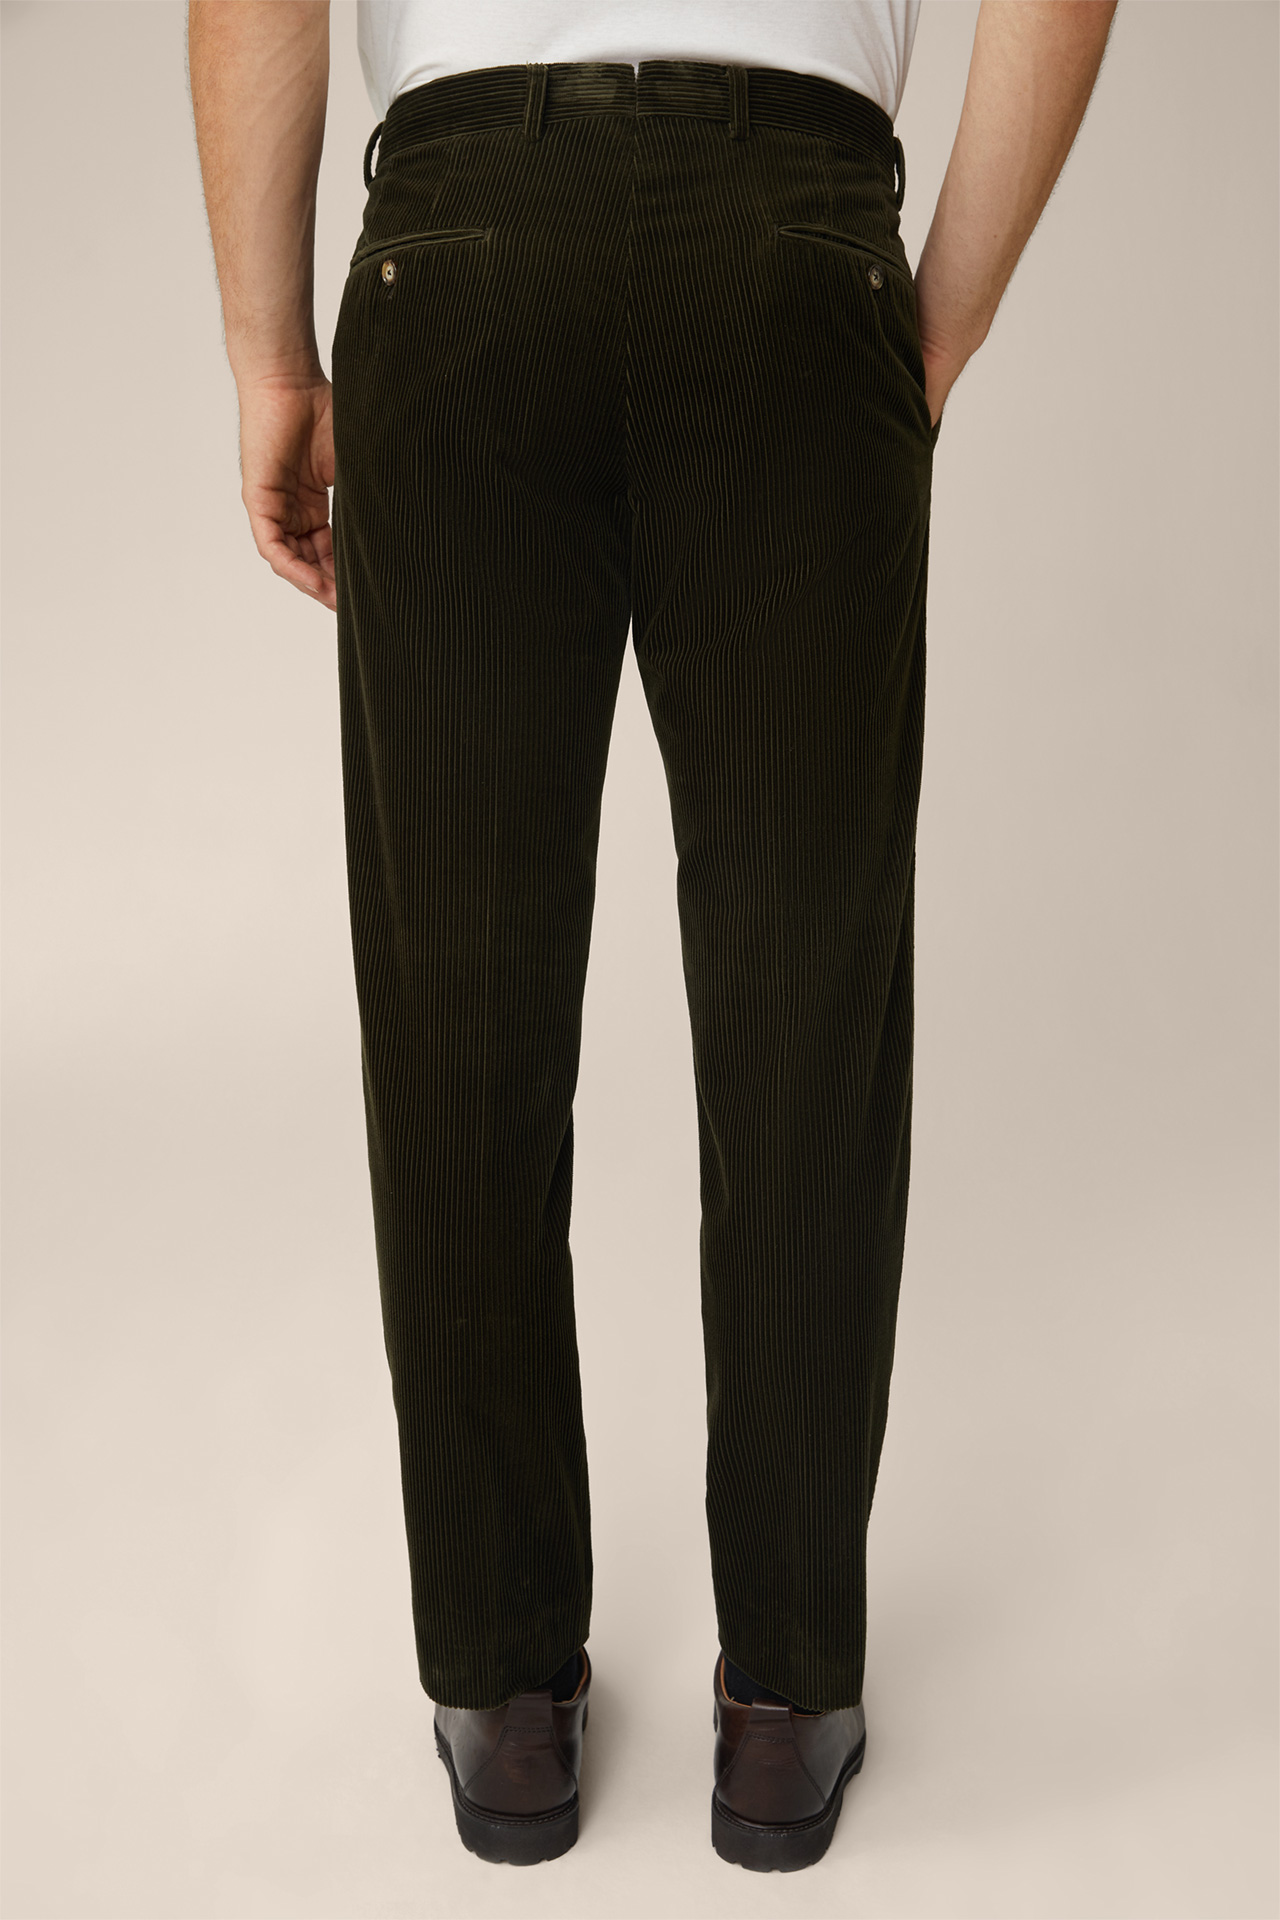 Santios Corduroy Trousers in Olive